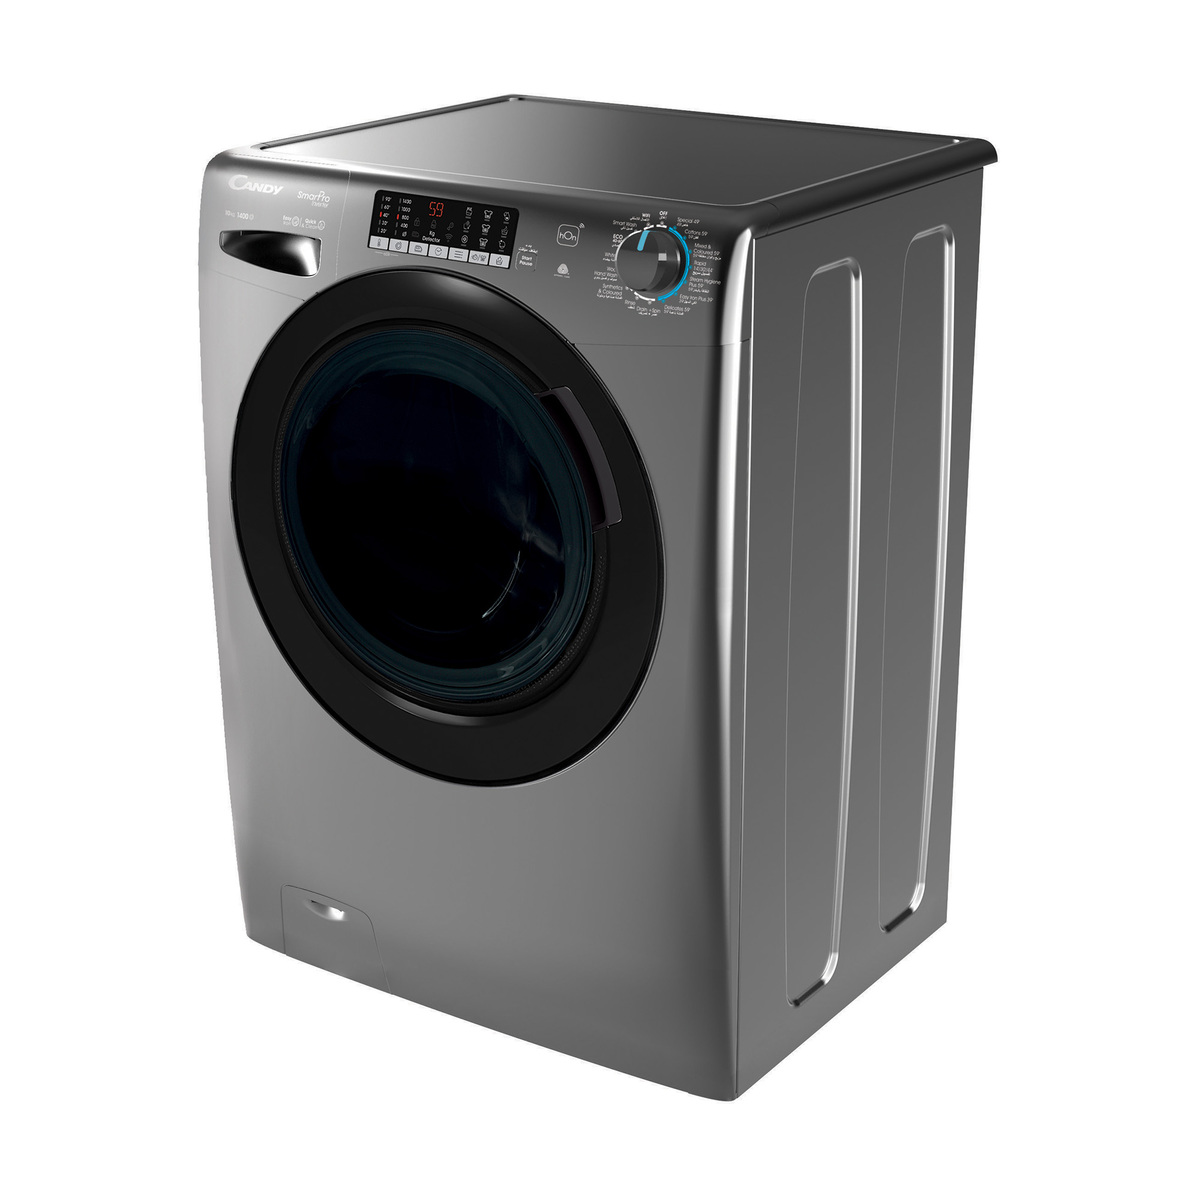 Candy Front Load Washing Machine 10KG,1400rpm,Anthracite,Black Smoky Door,Wifi+BT,SmartPro Inverter Motor,Steam  Function,Mix Power System,Class A,6 Digit Display,CSO4106TWMBR-19